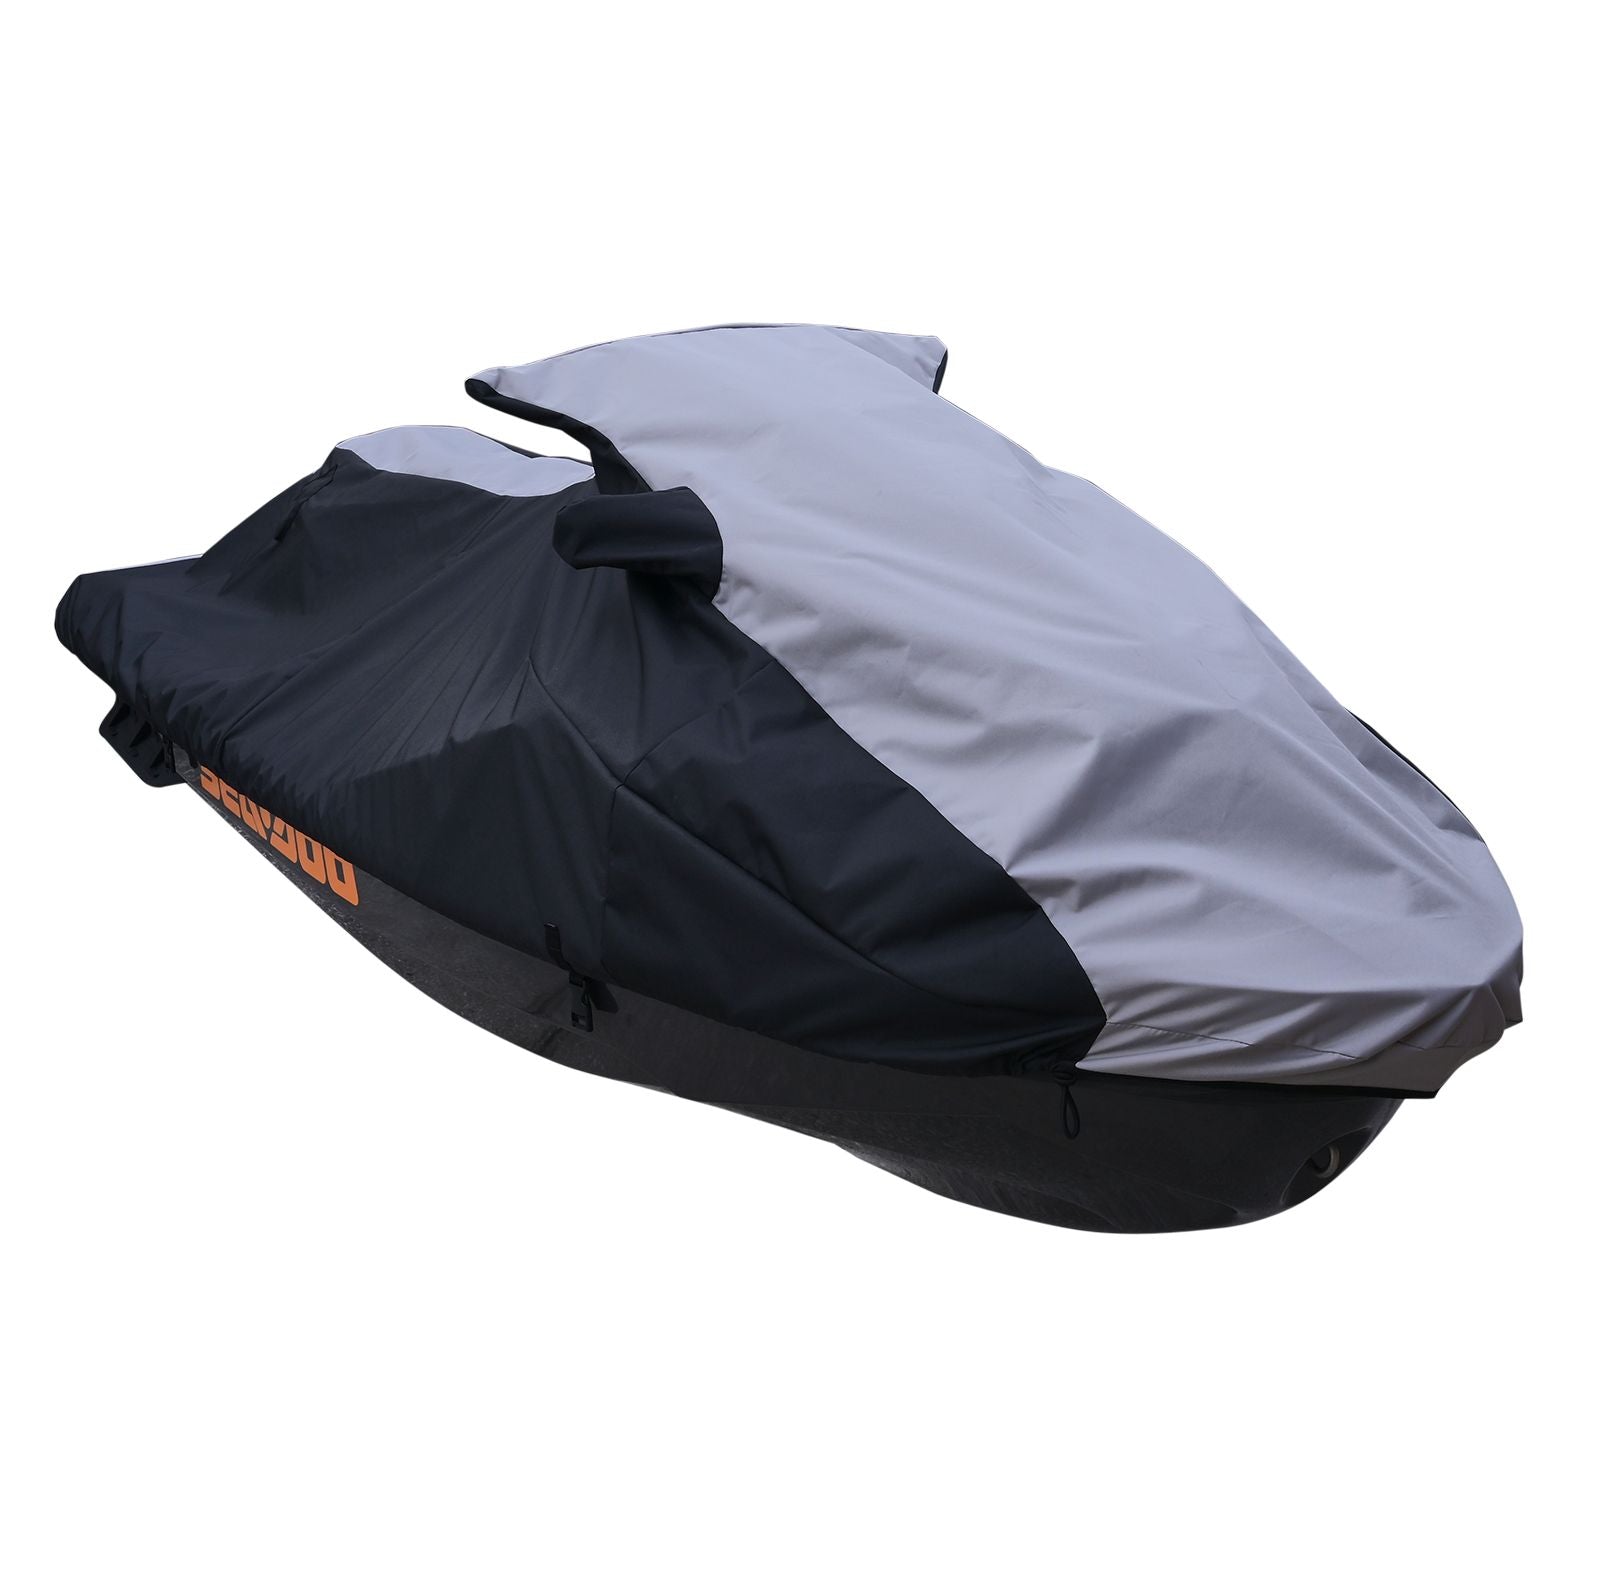 Trailerable Storage cover with vents for Yamaha 1994-1997 Wave Raider 700/760/1100